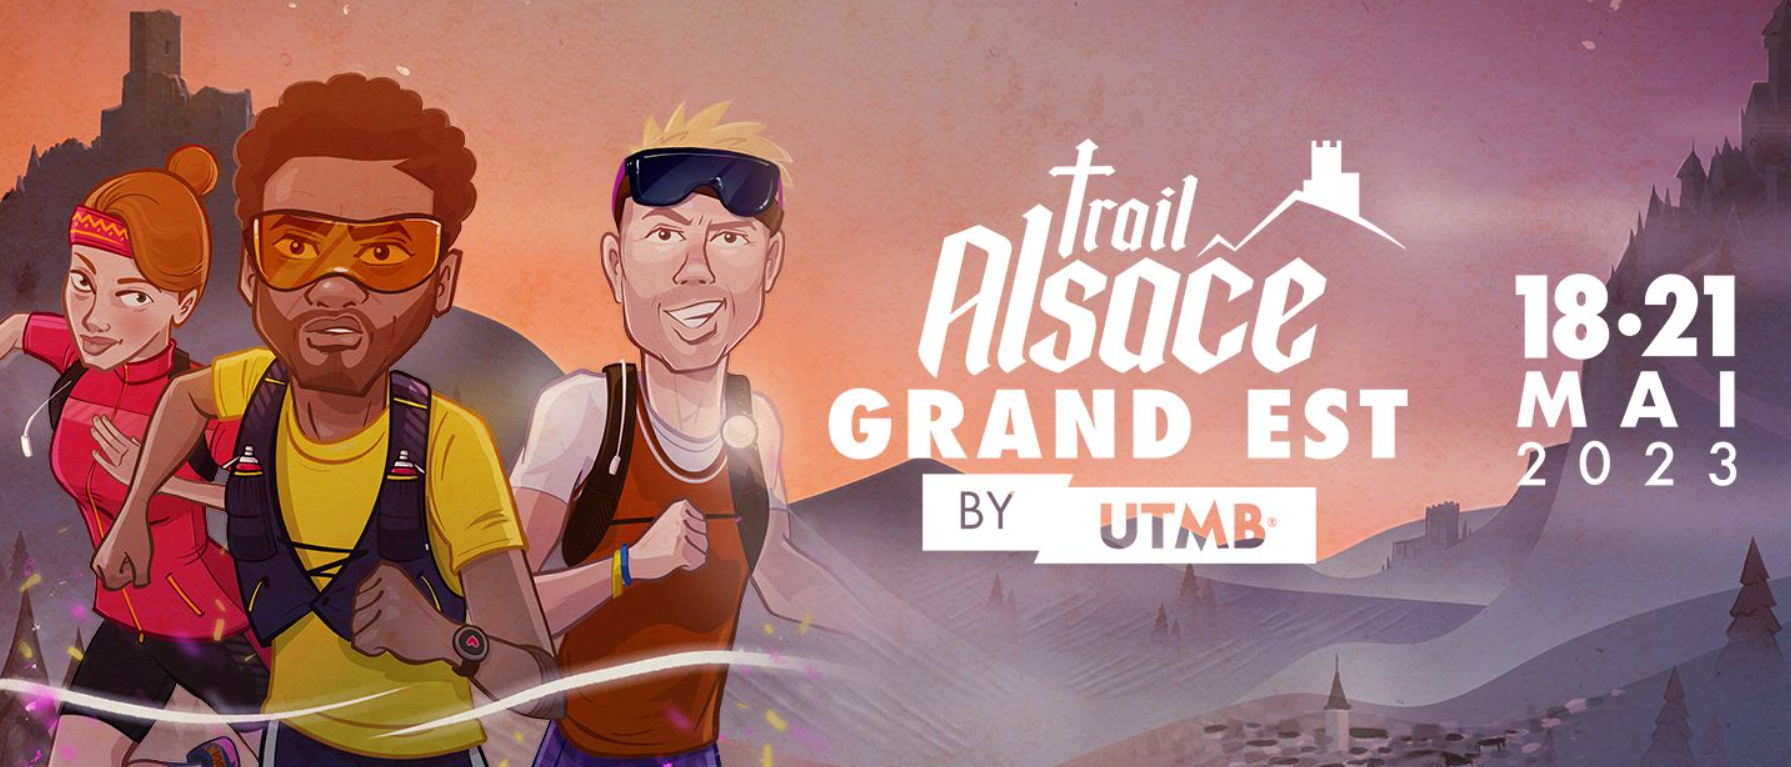 Trail Alsace Grand Est by UTMB 2024 - Horaire, Chaînes TV et Streaming